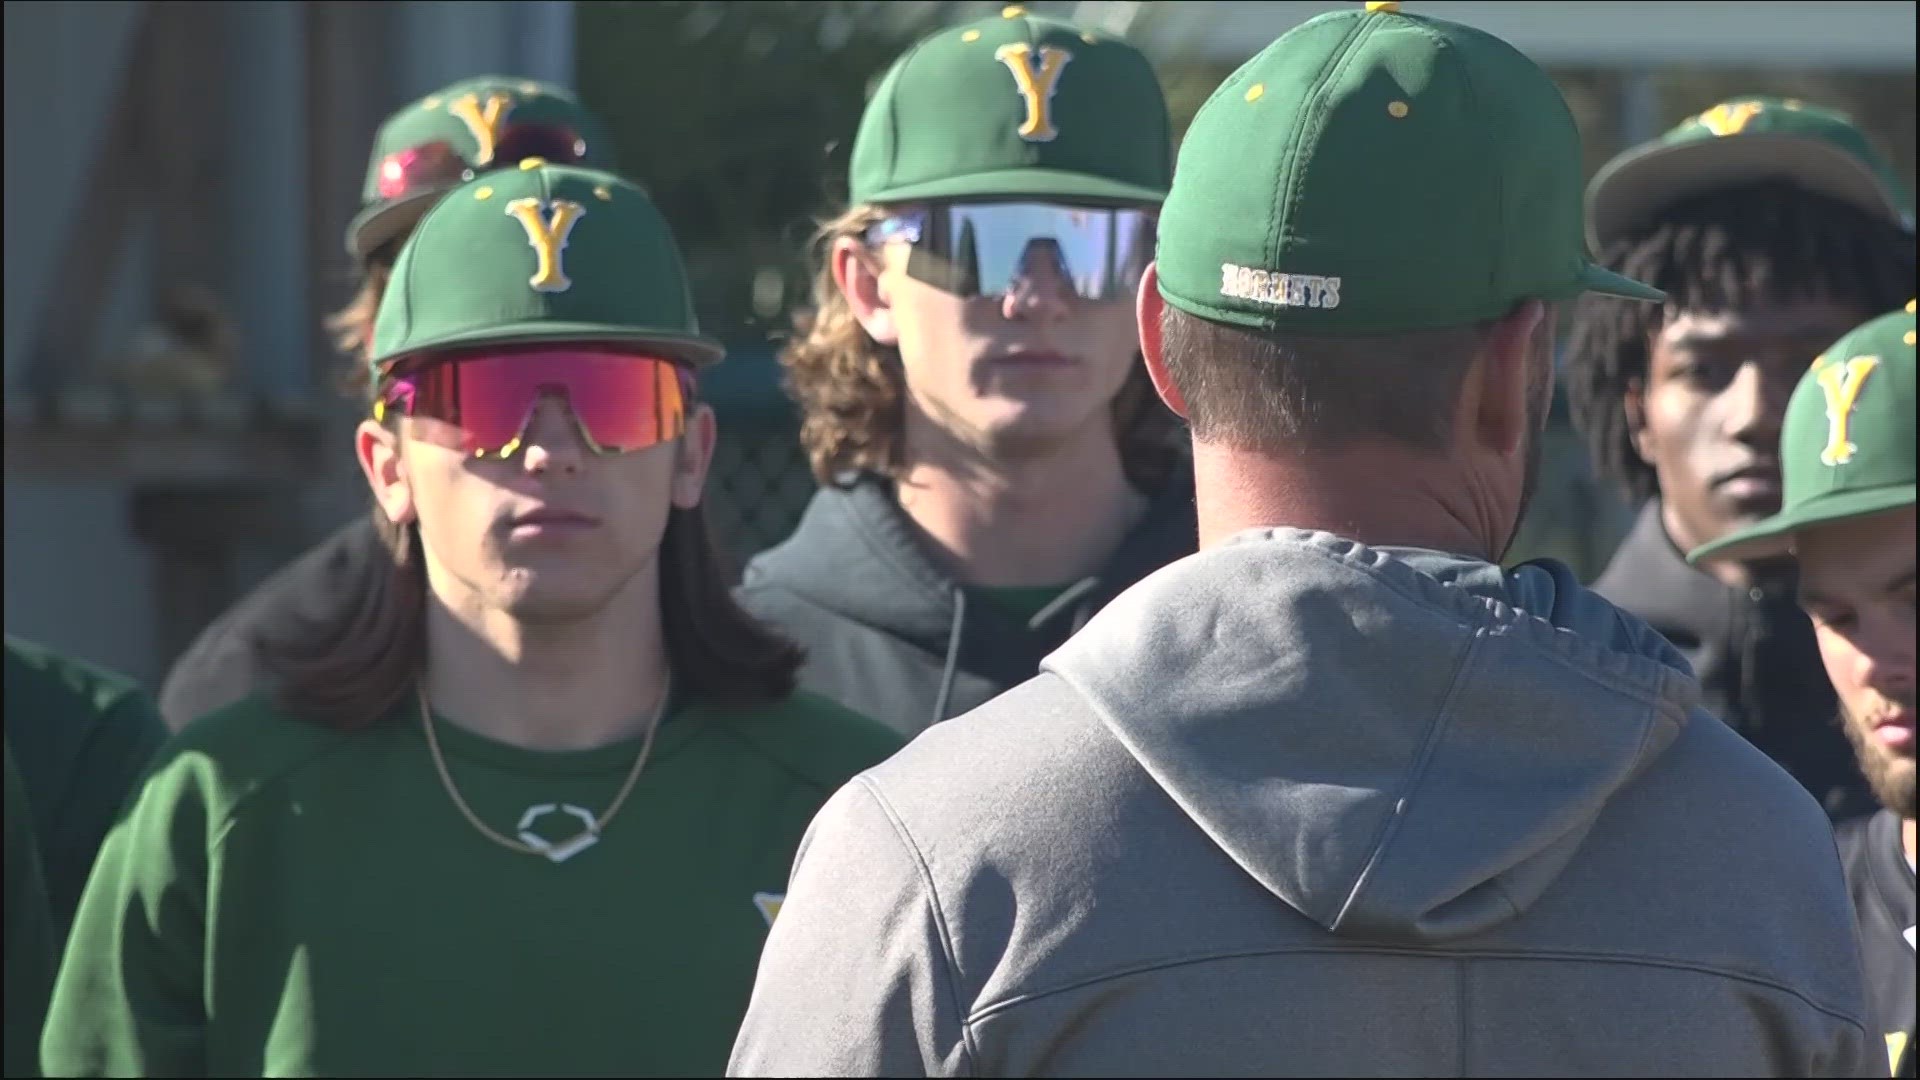 The Hornets are 6-2 to start this season. They're still looking to win their first baseball state title and look primed to do so with a talented young core.